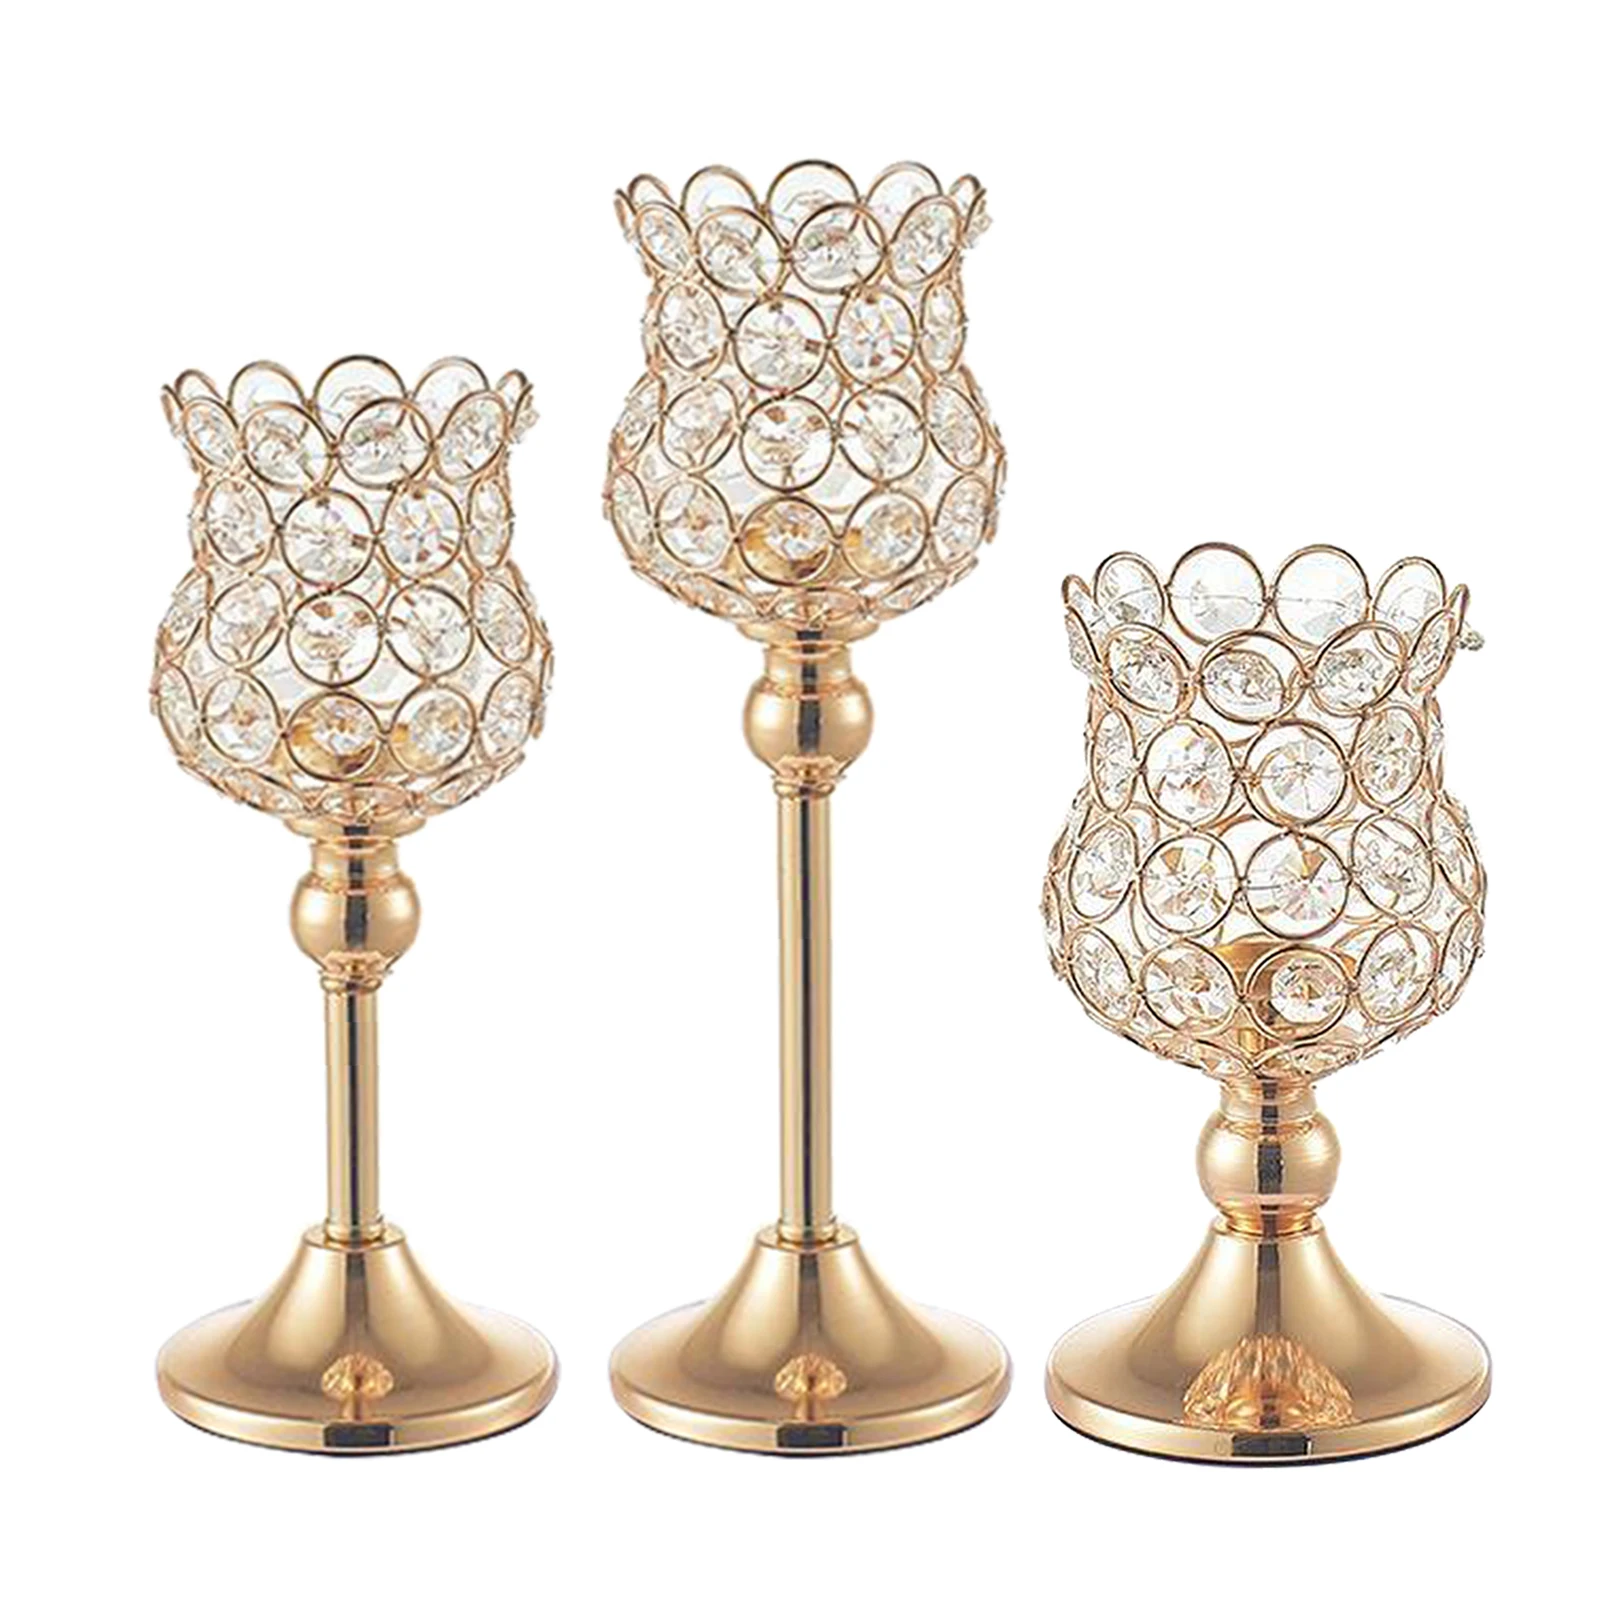 Home Decor Centerpiece Gold Crystal Candle Holders Dinner 